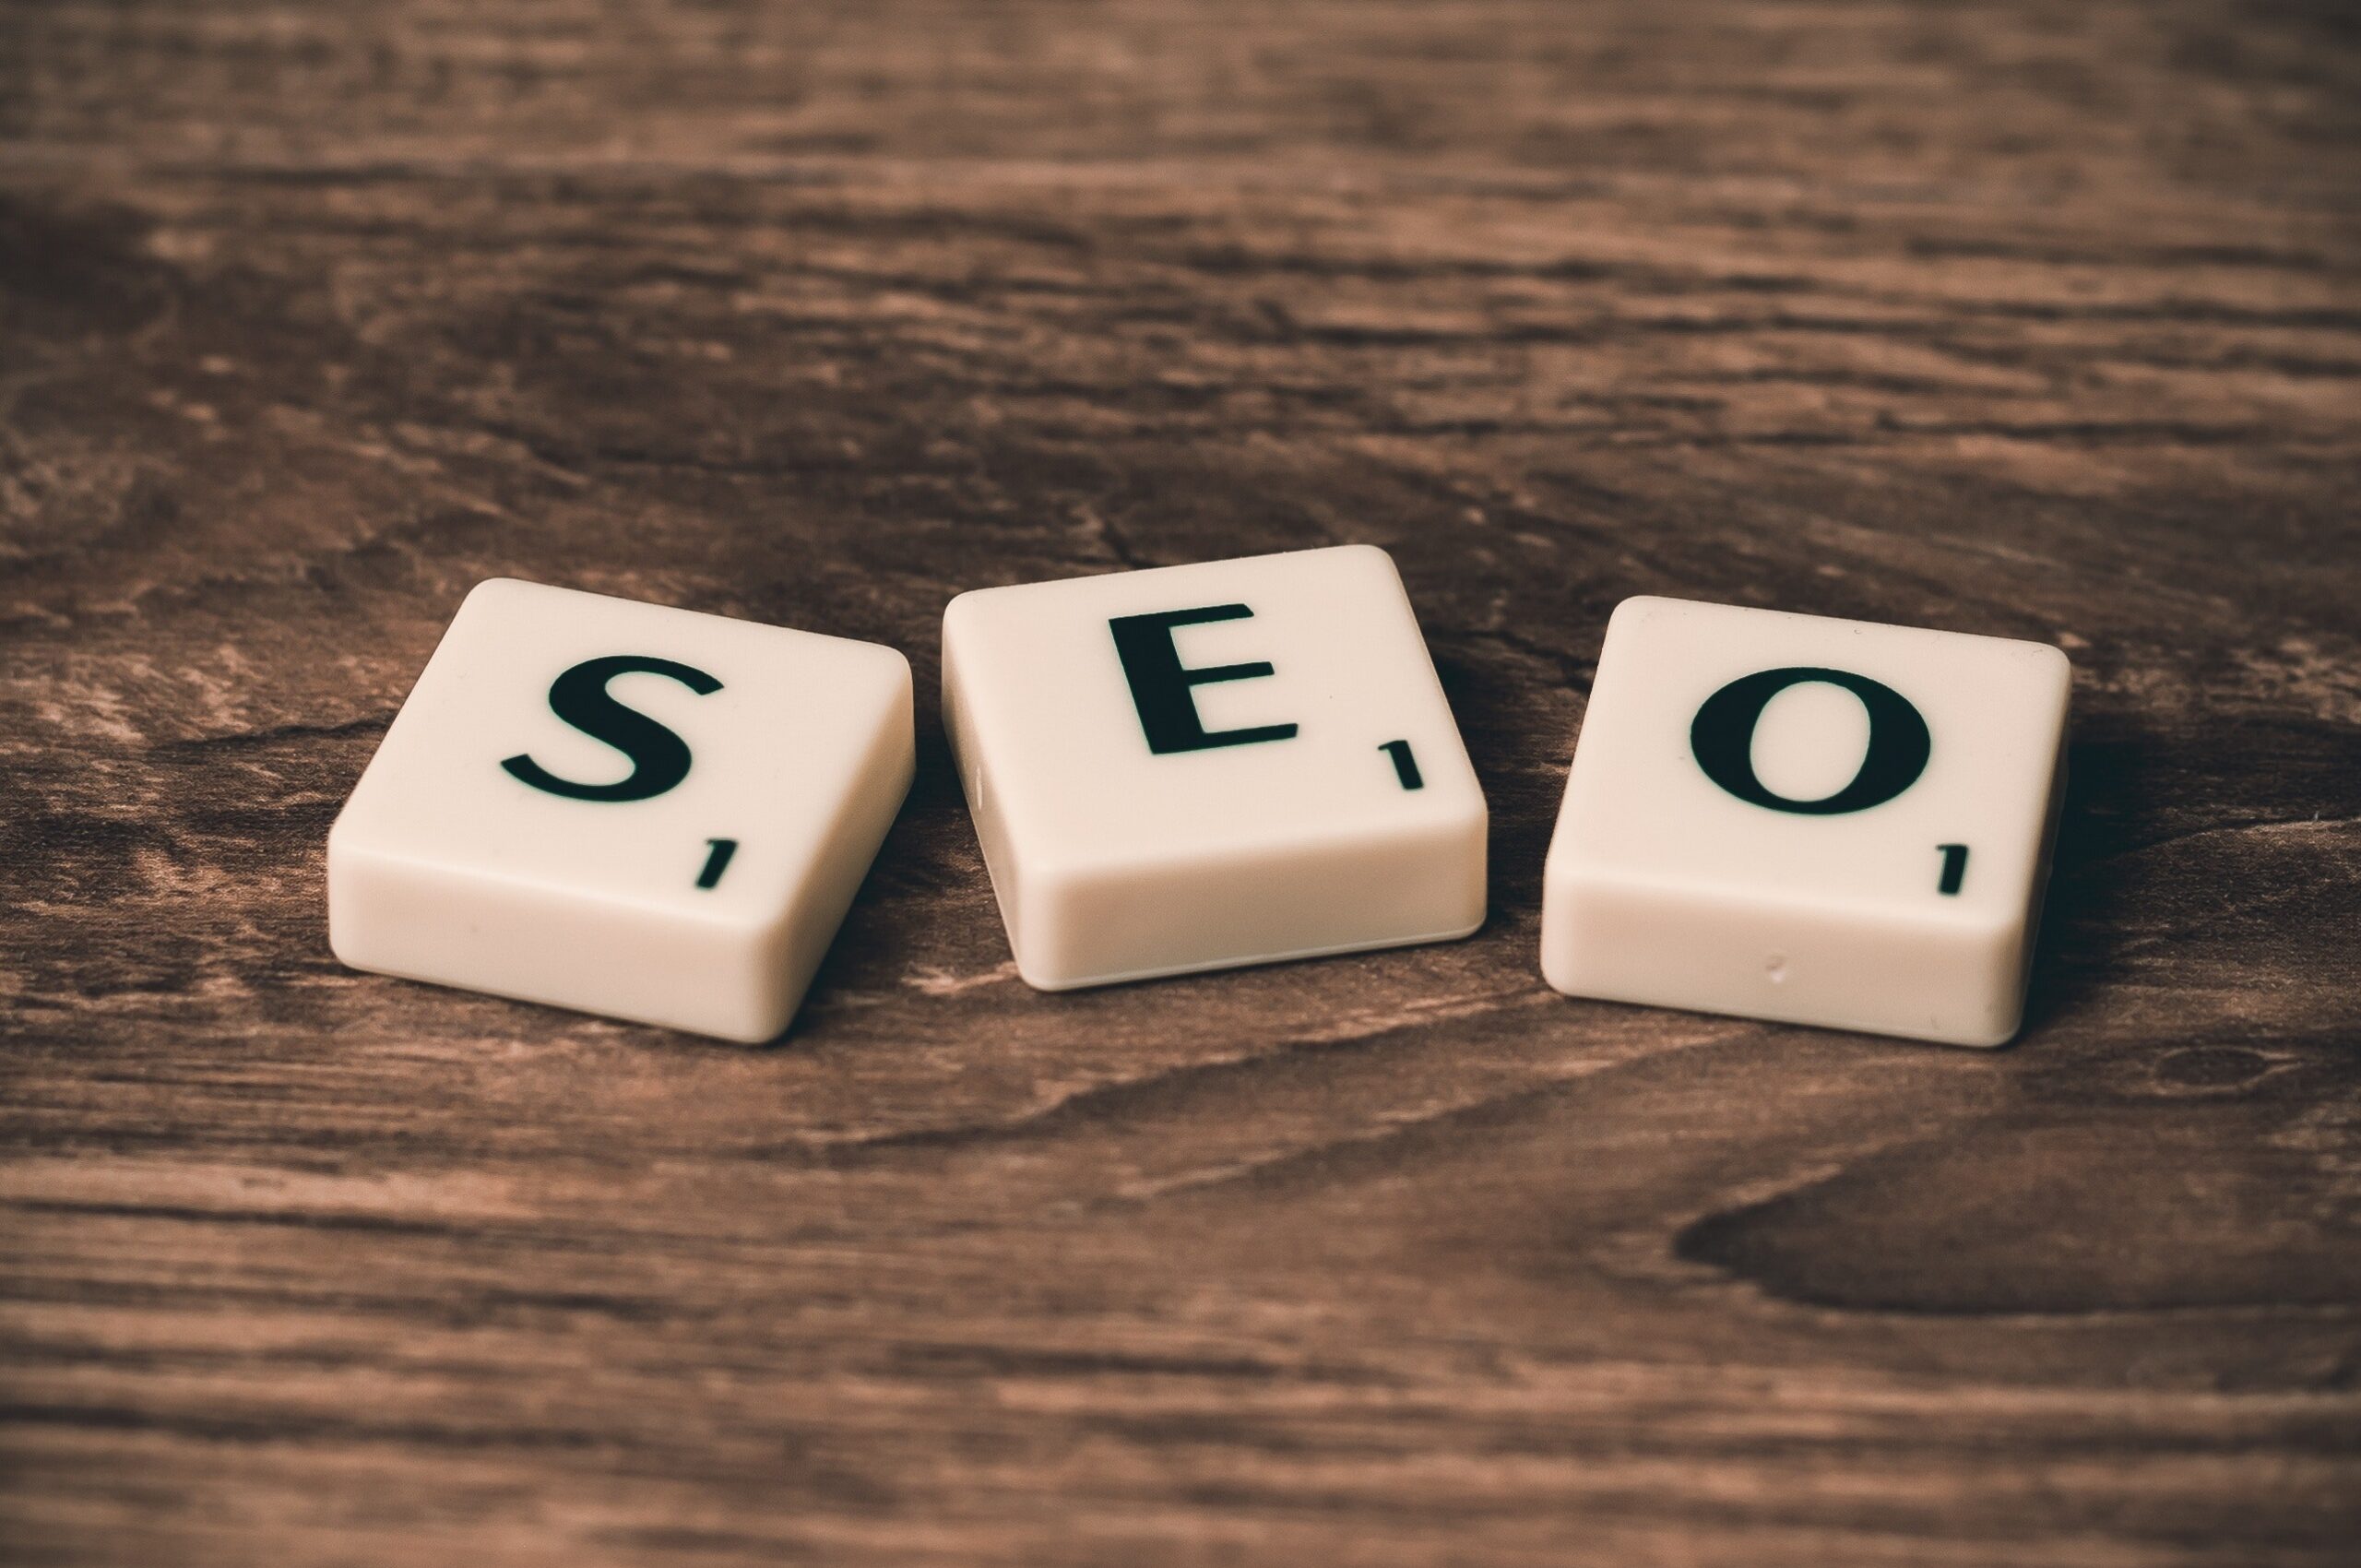 Best SEO Software for Small Business